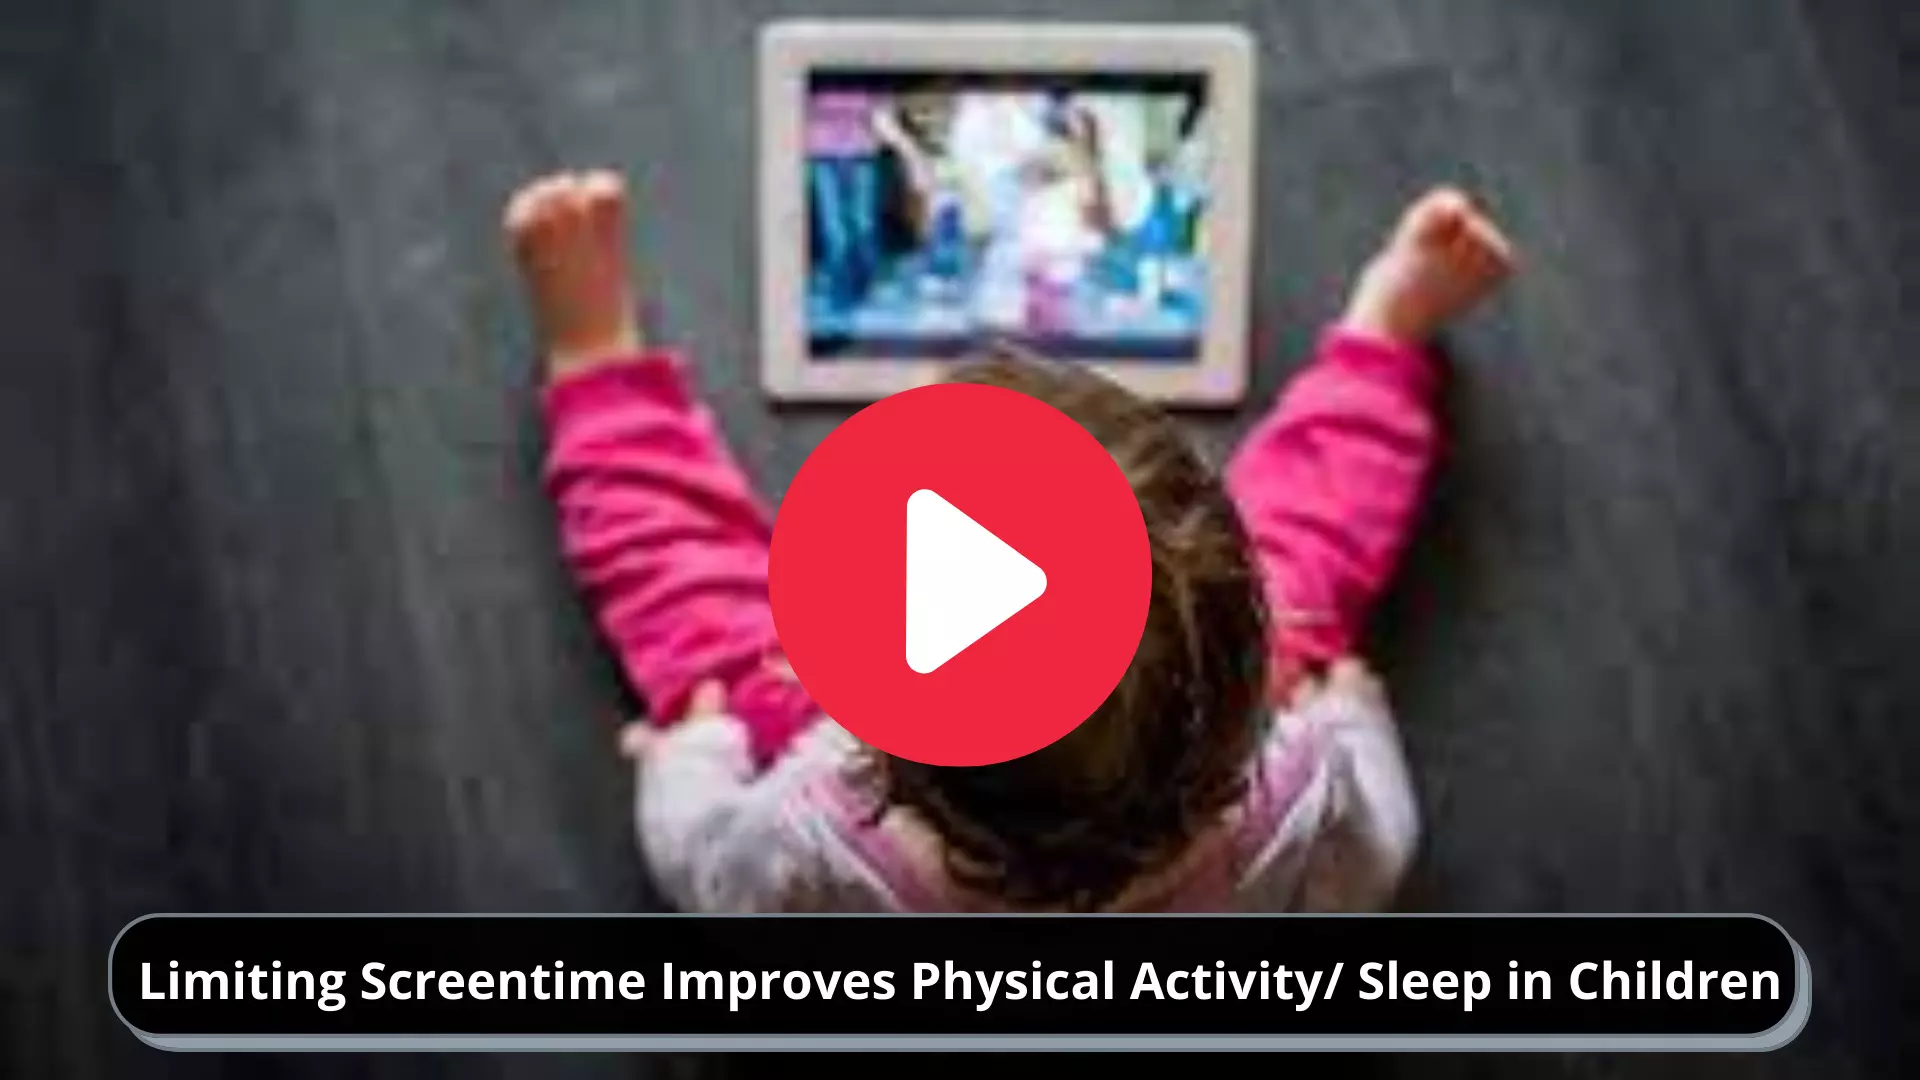 Limiting Screentime Improves Physical Activity/ Sleep in Children